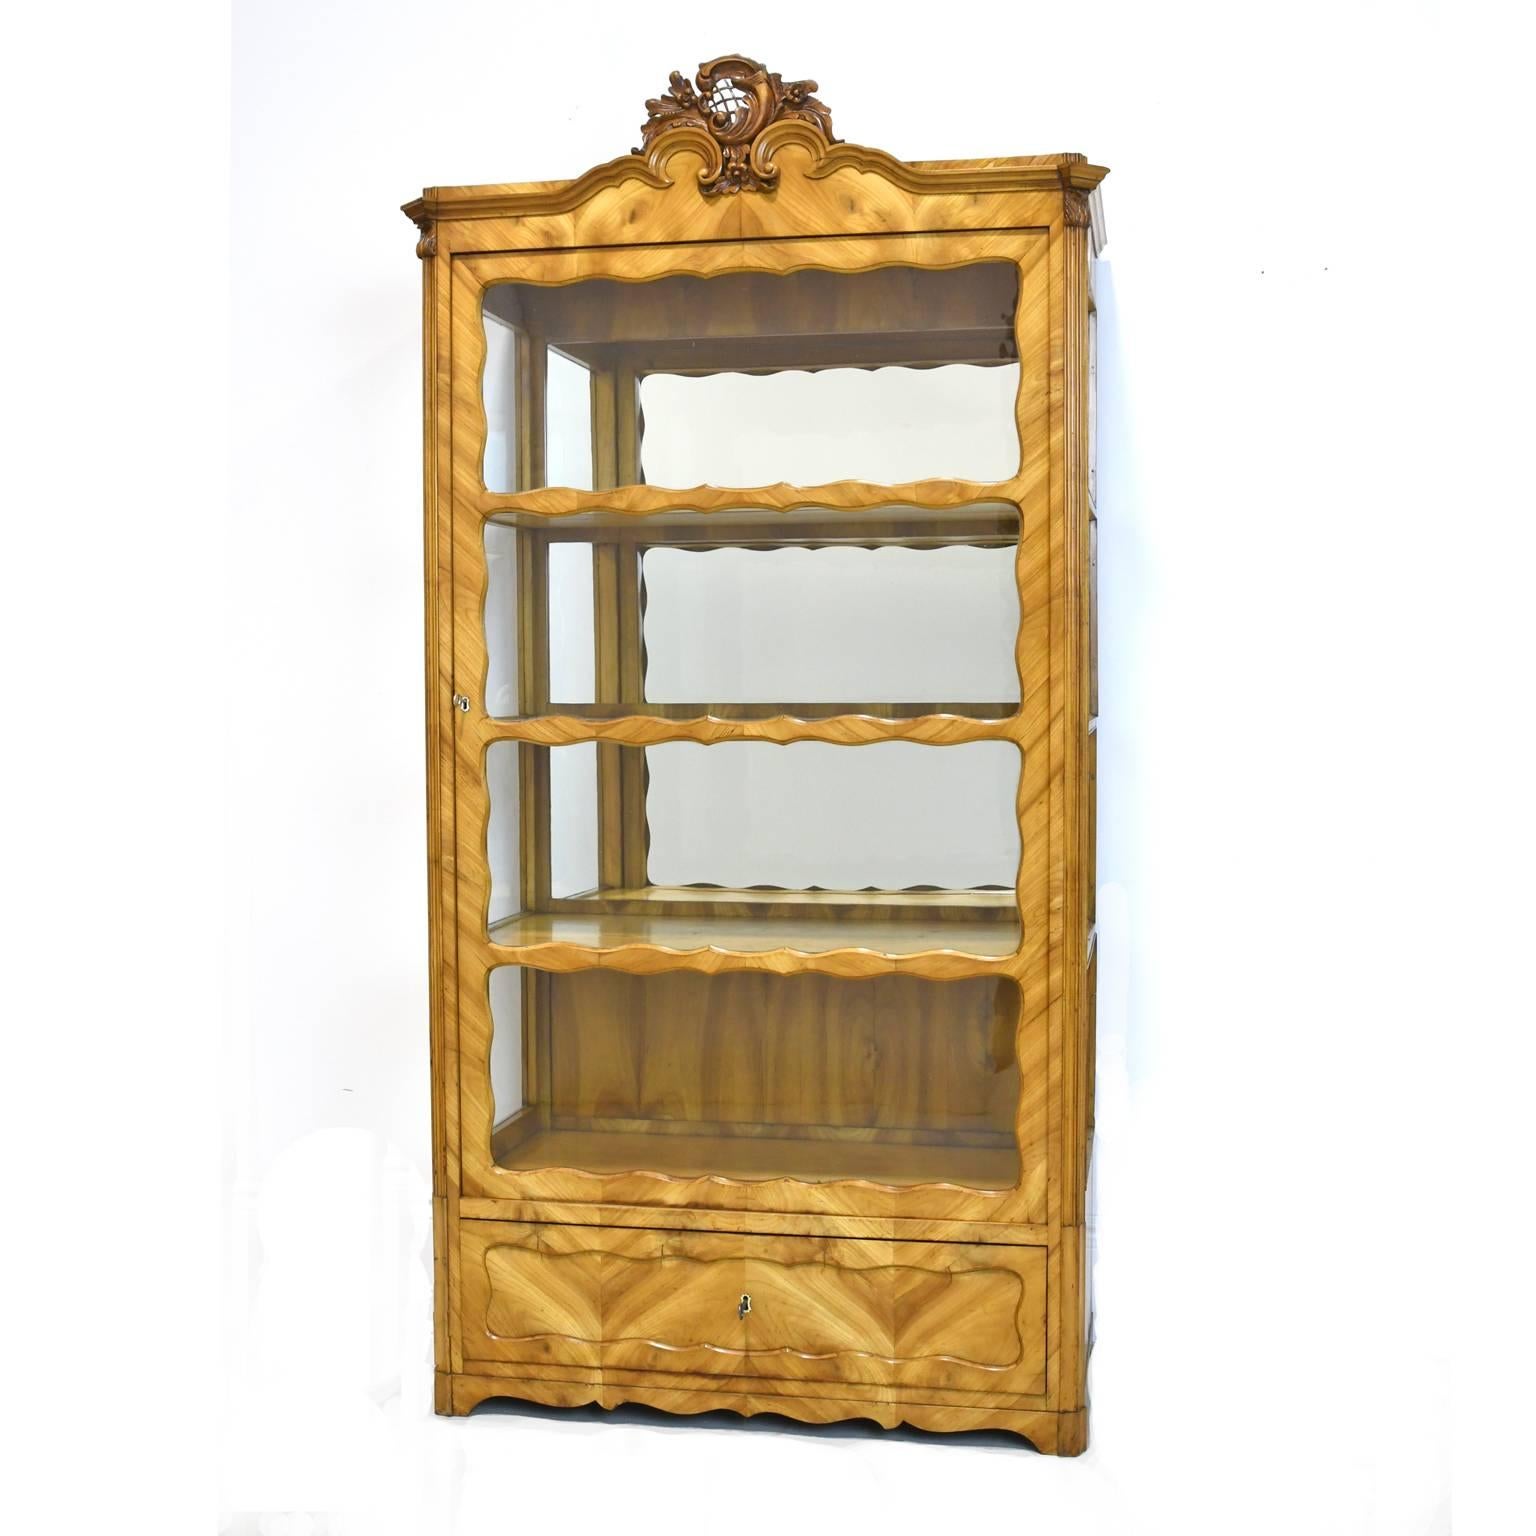 A very lovely display cabinet or vitrine in cherrywood with original glass door, glass side panels and mirrored back, with carved bonnet. Offers one storage drawer with working lock and key. Germany, circa 1850.

Measures: 38 1/2